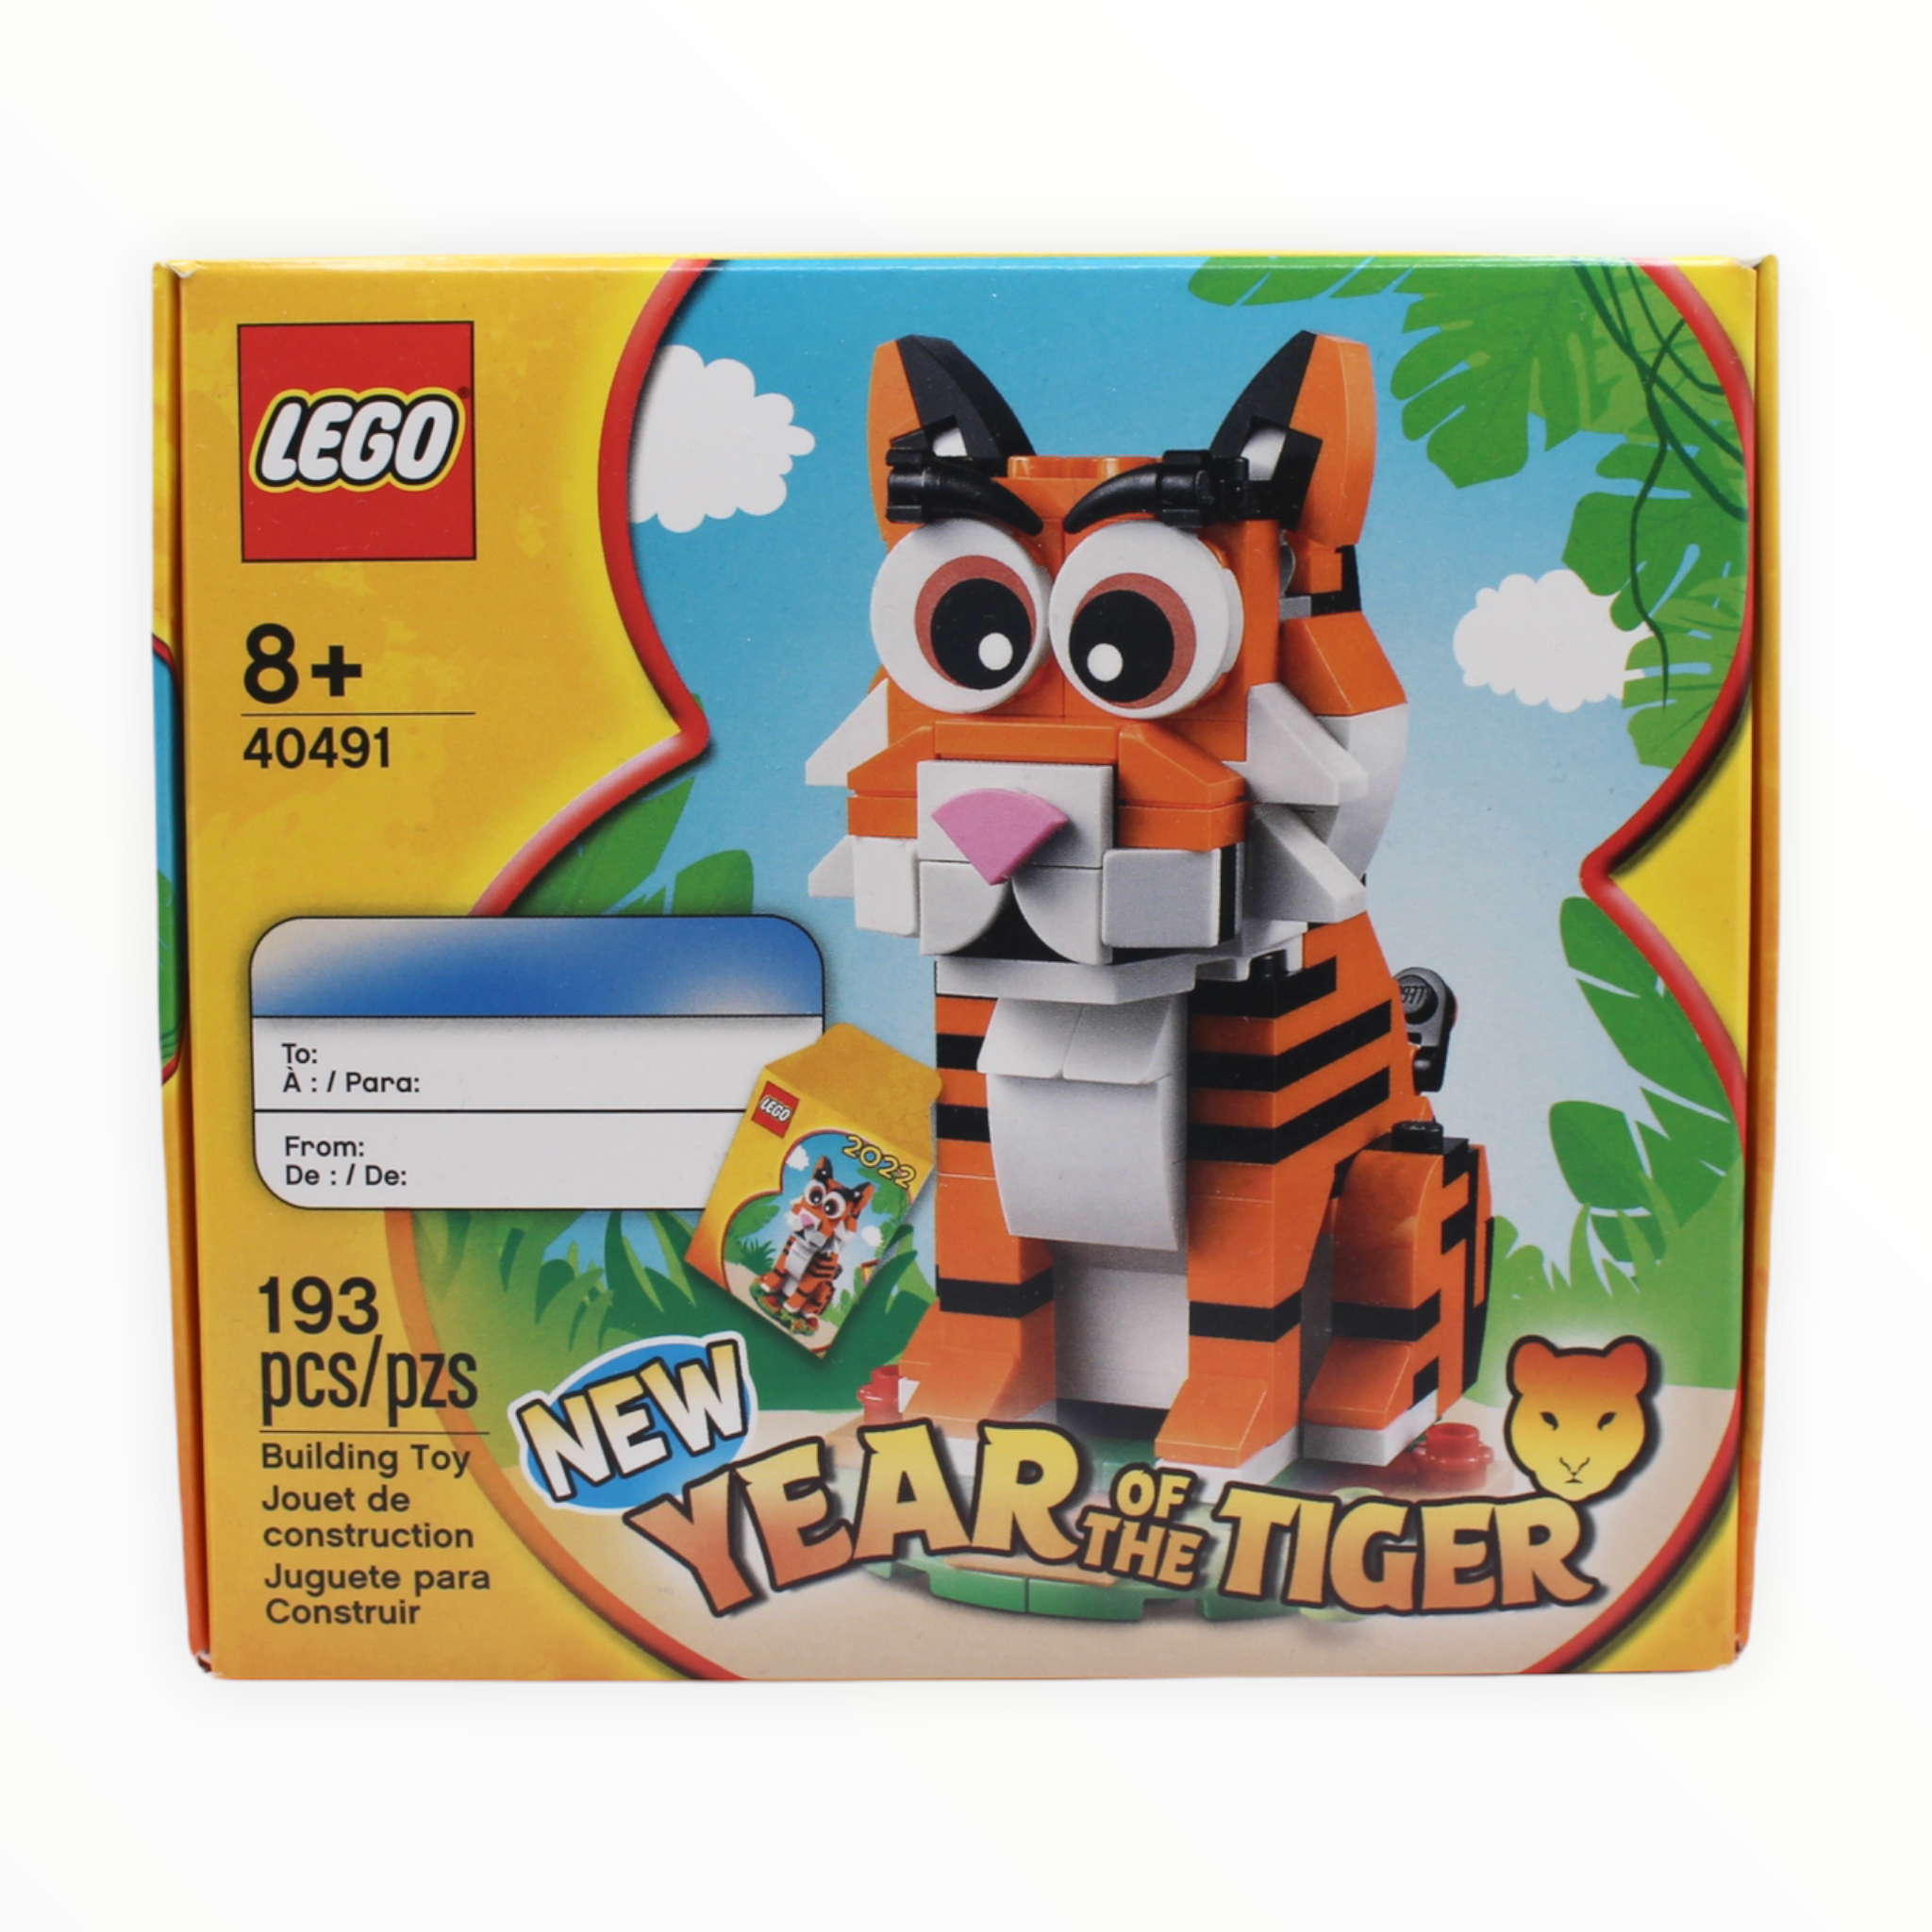 Retired Set 40491 LEGO Year of the Tiger (2022)